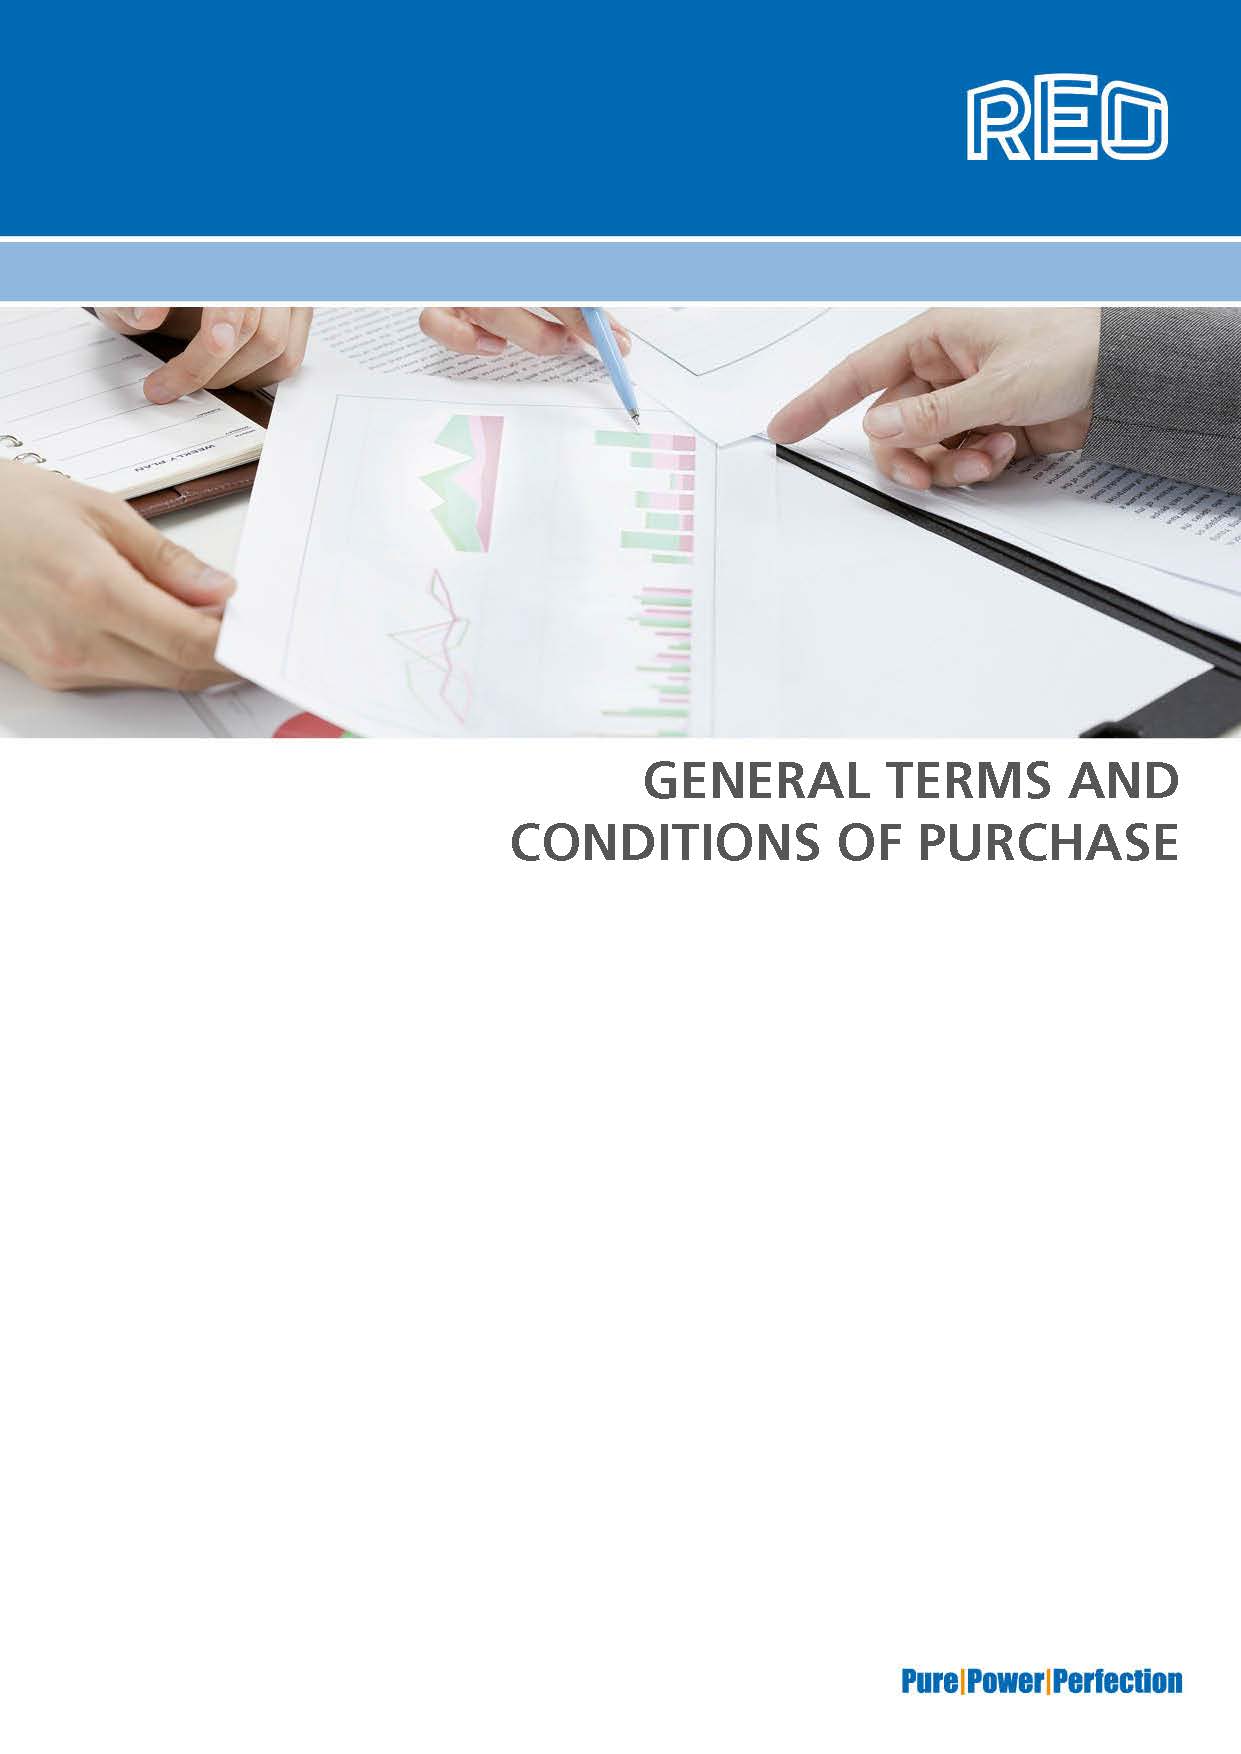 REO General Terms and Conditions of Purchase